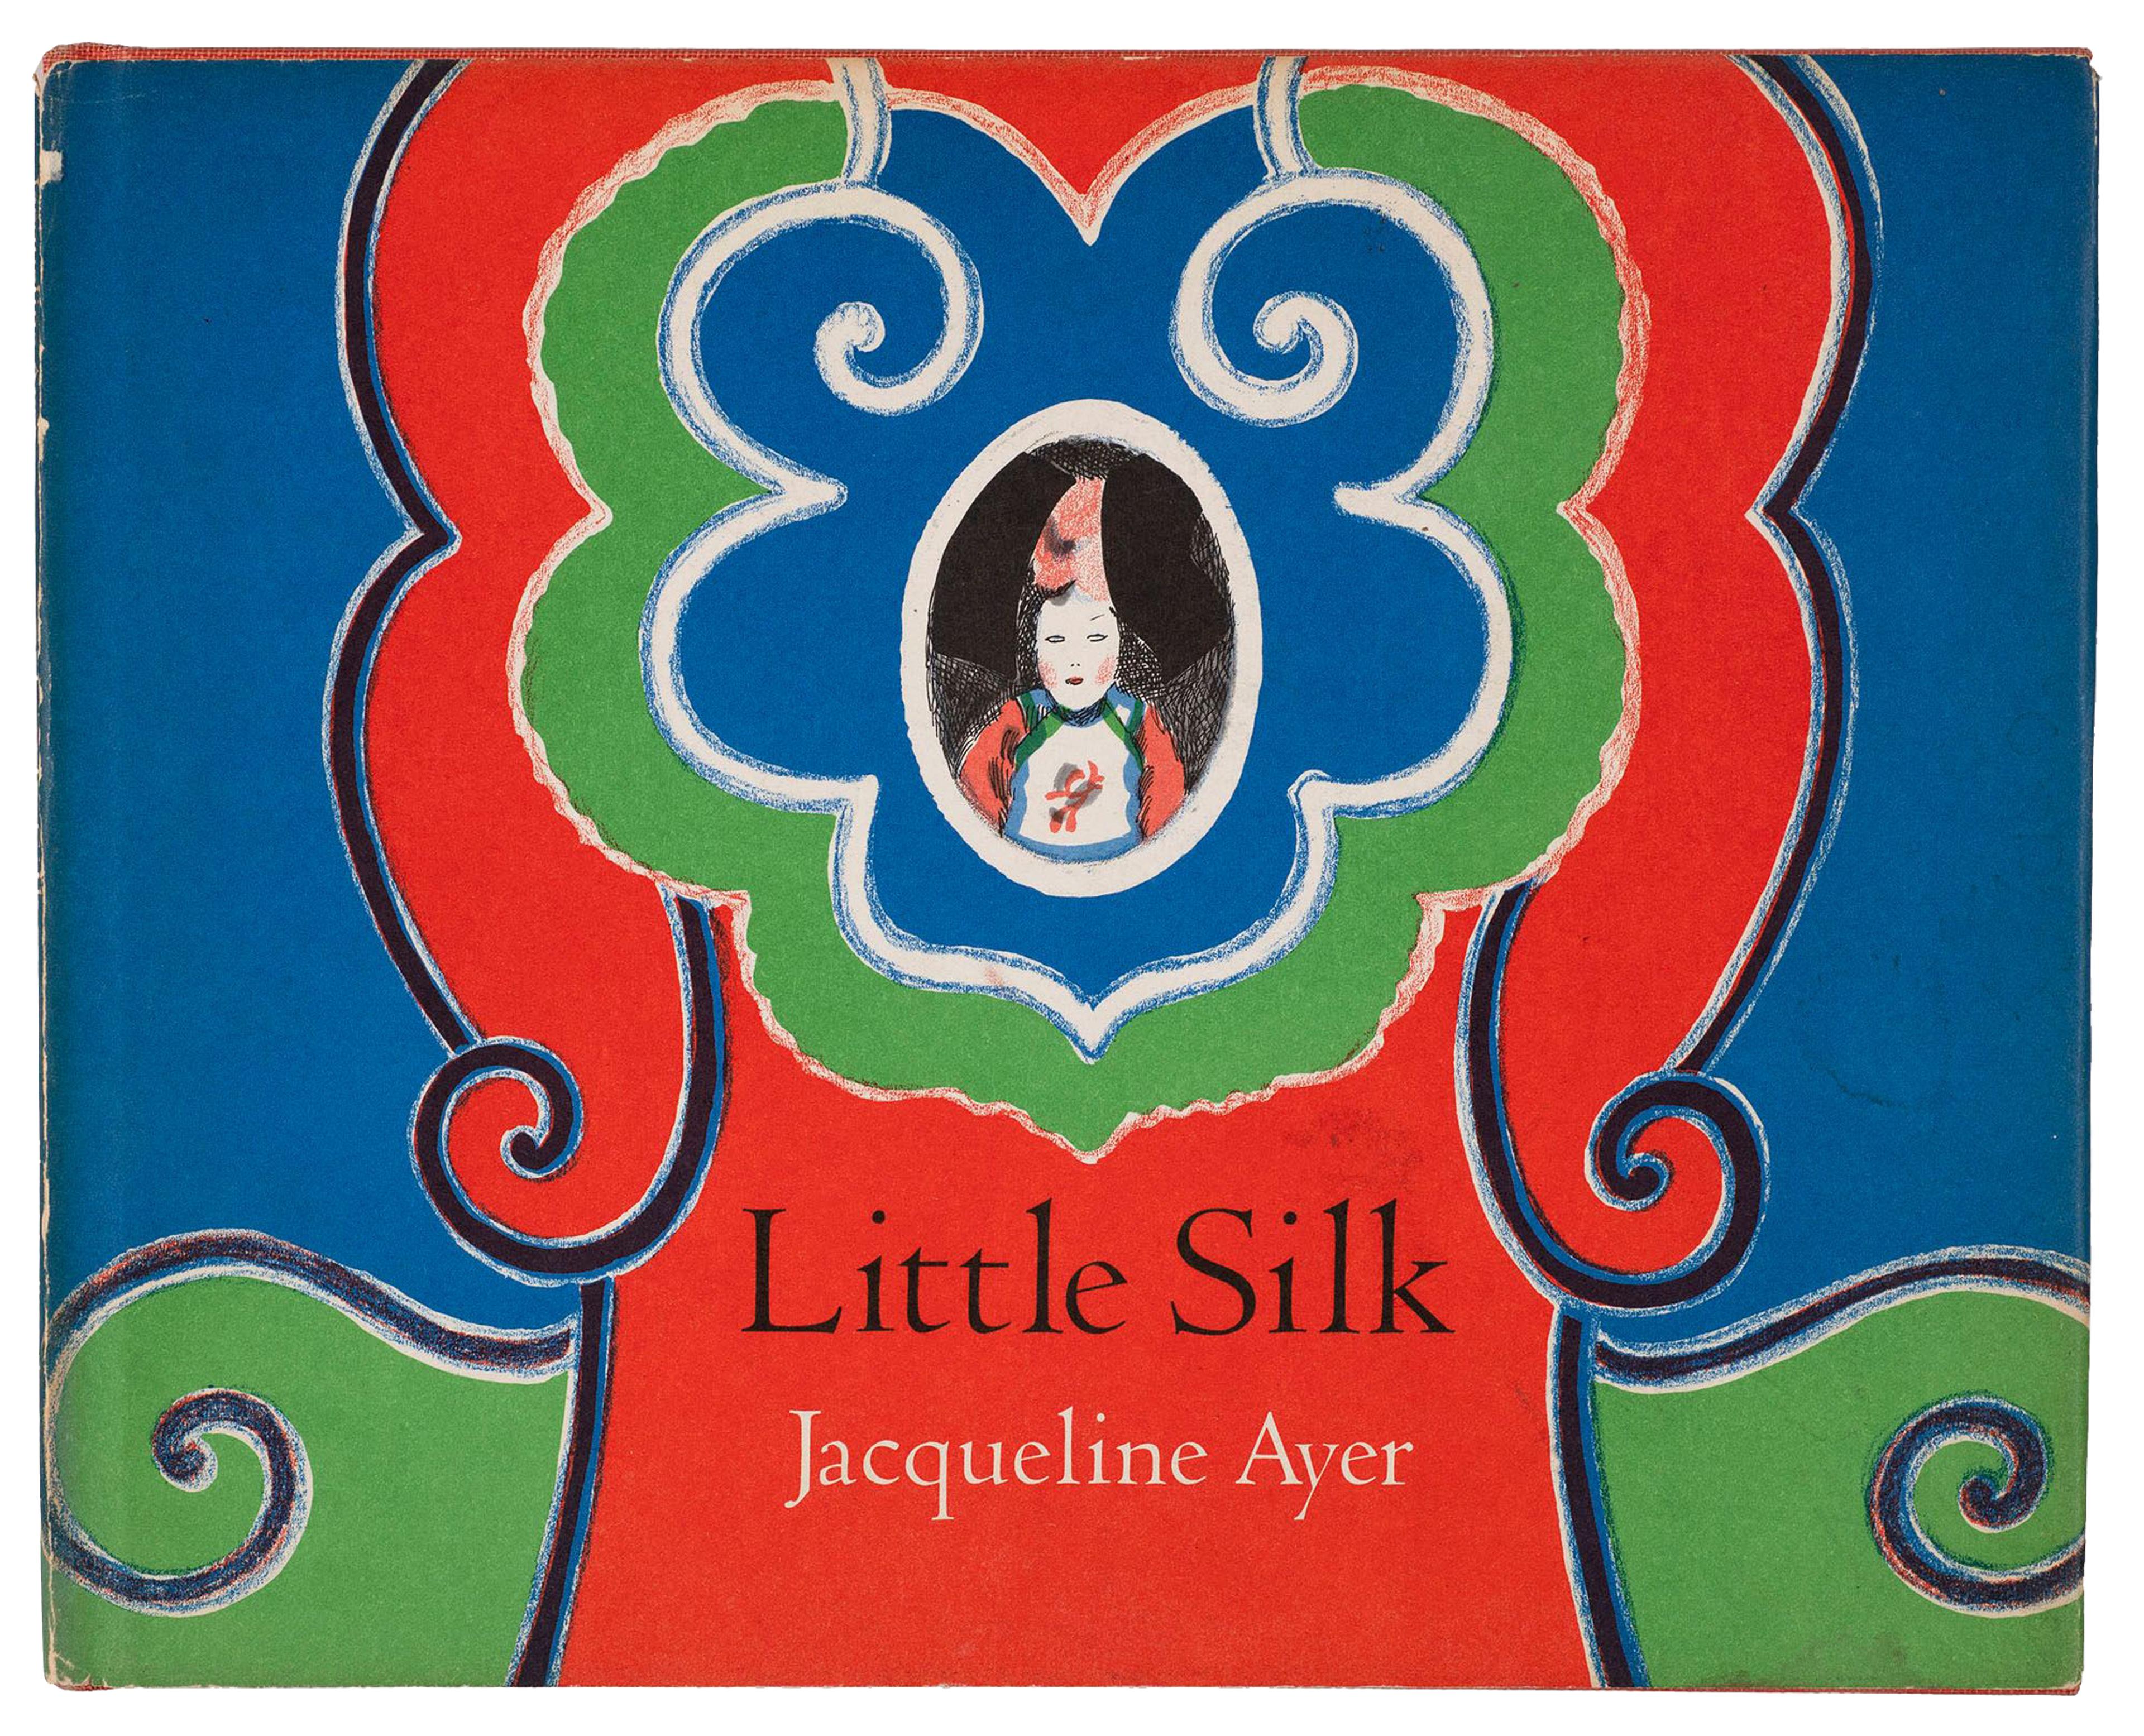 Cover of Little Silk book which has bright red, green and blue patterns and an illustration of the doll.